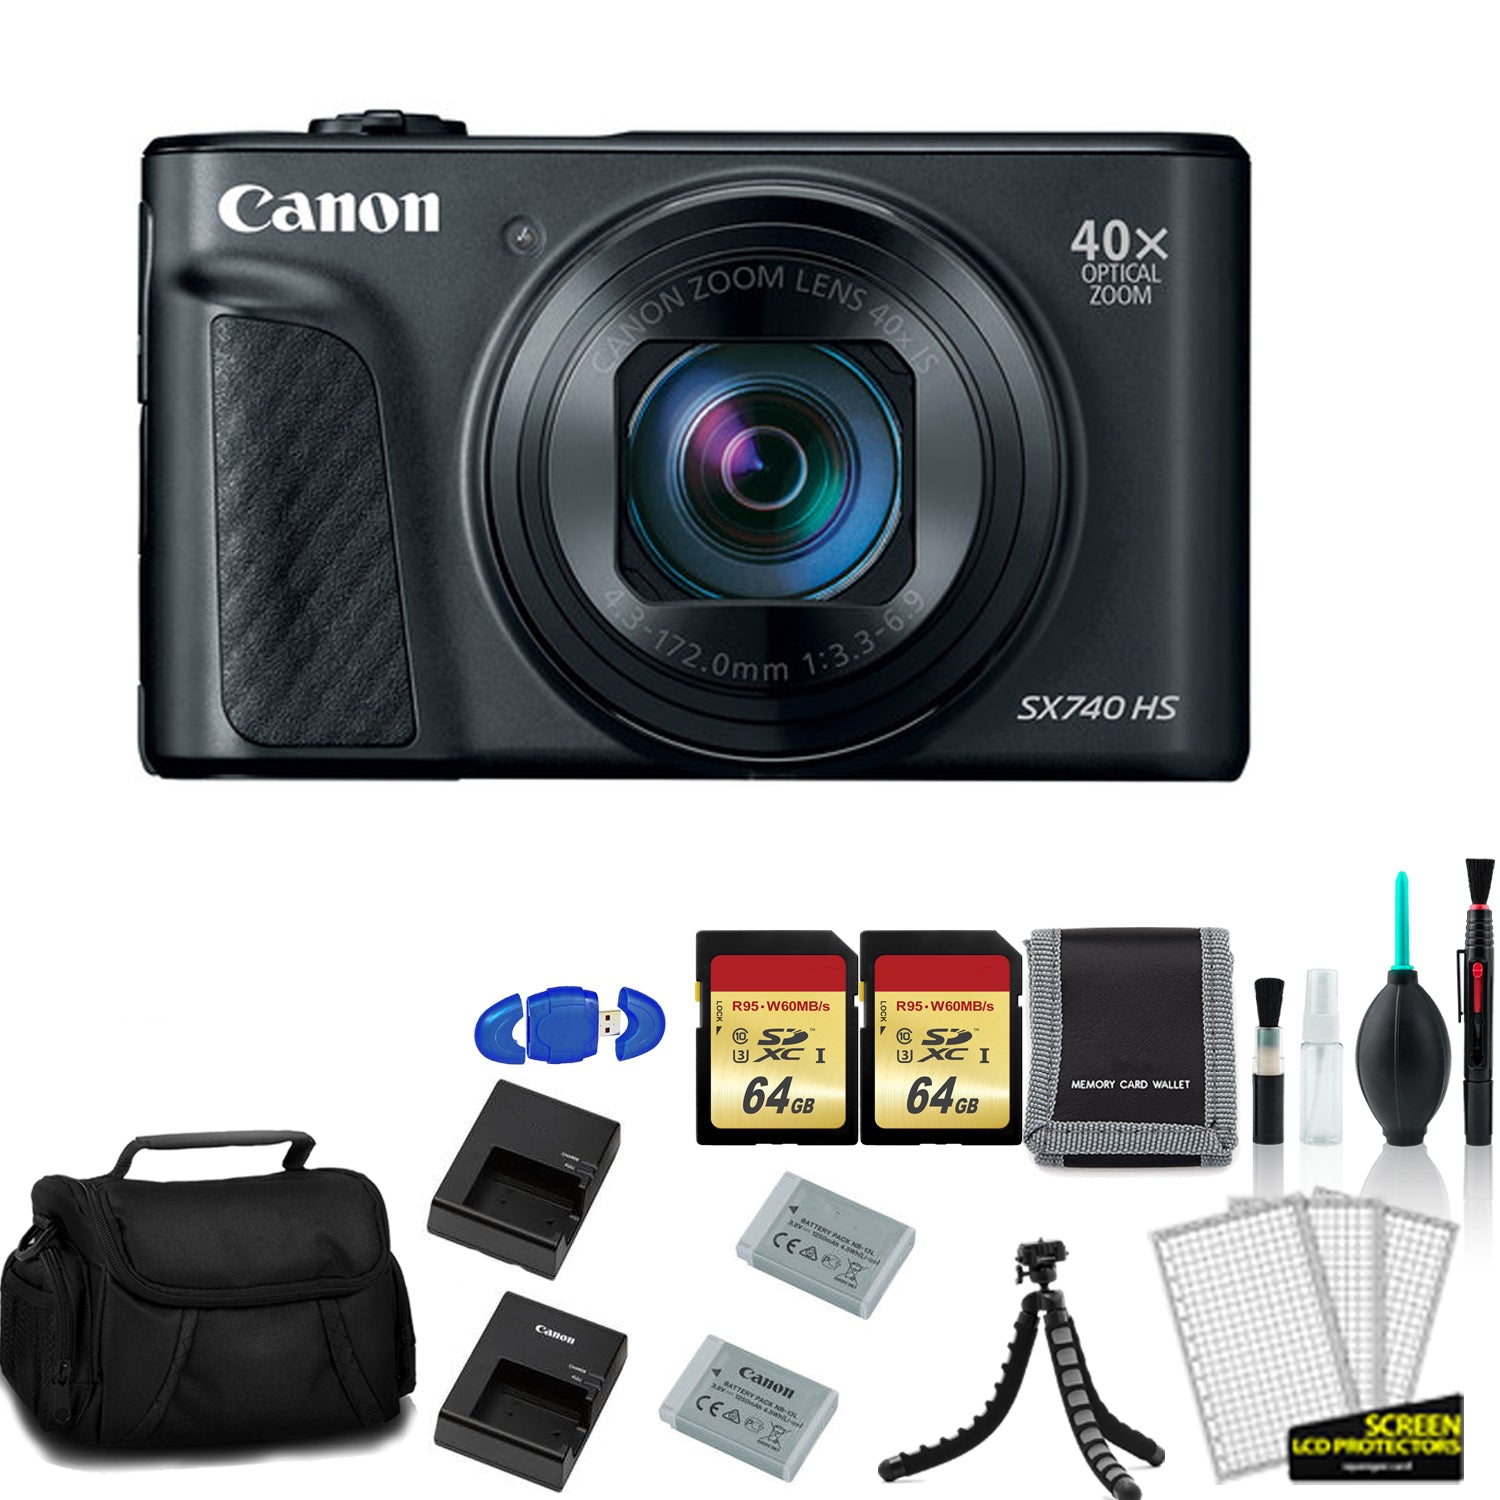 Canon PowerShot SX740 HS Digital Camera (Black) with 2x 64GB Memory Card + Extra Battery and Charger + More - International Model